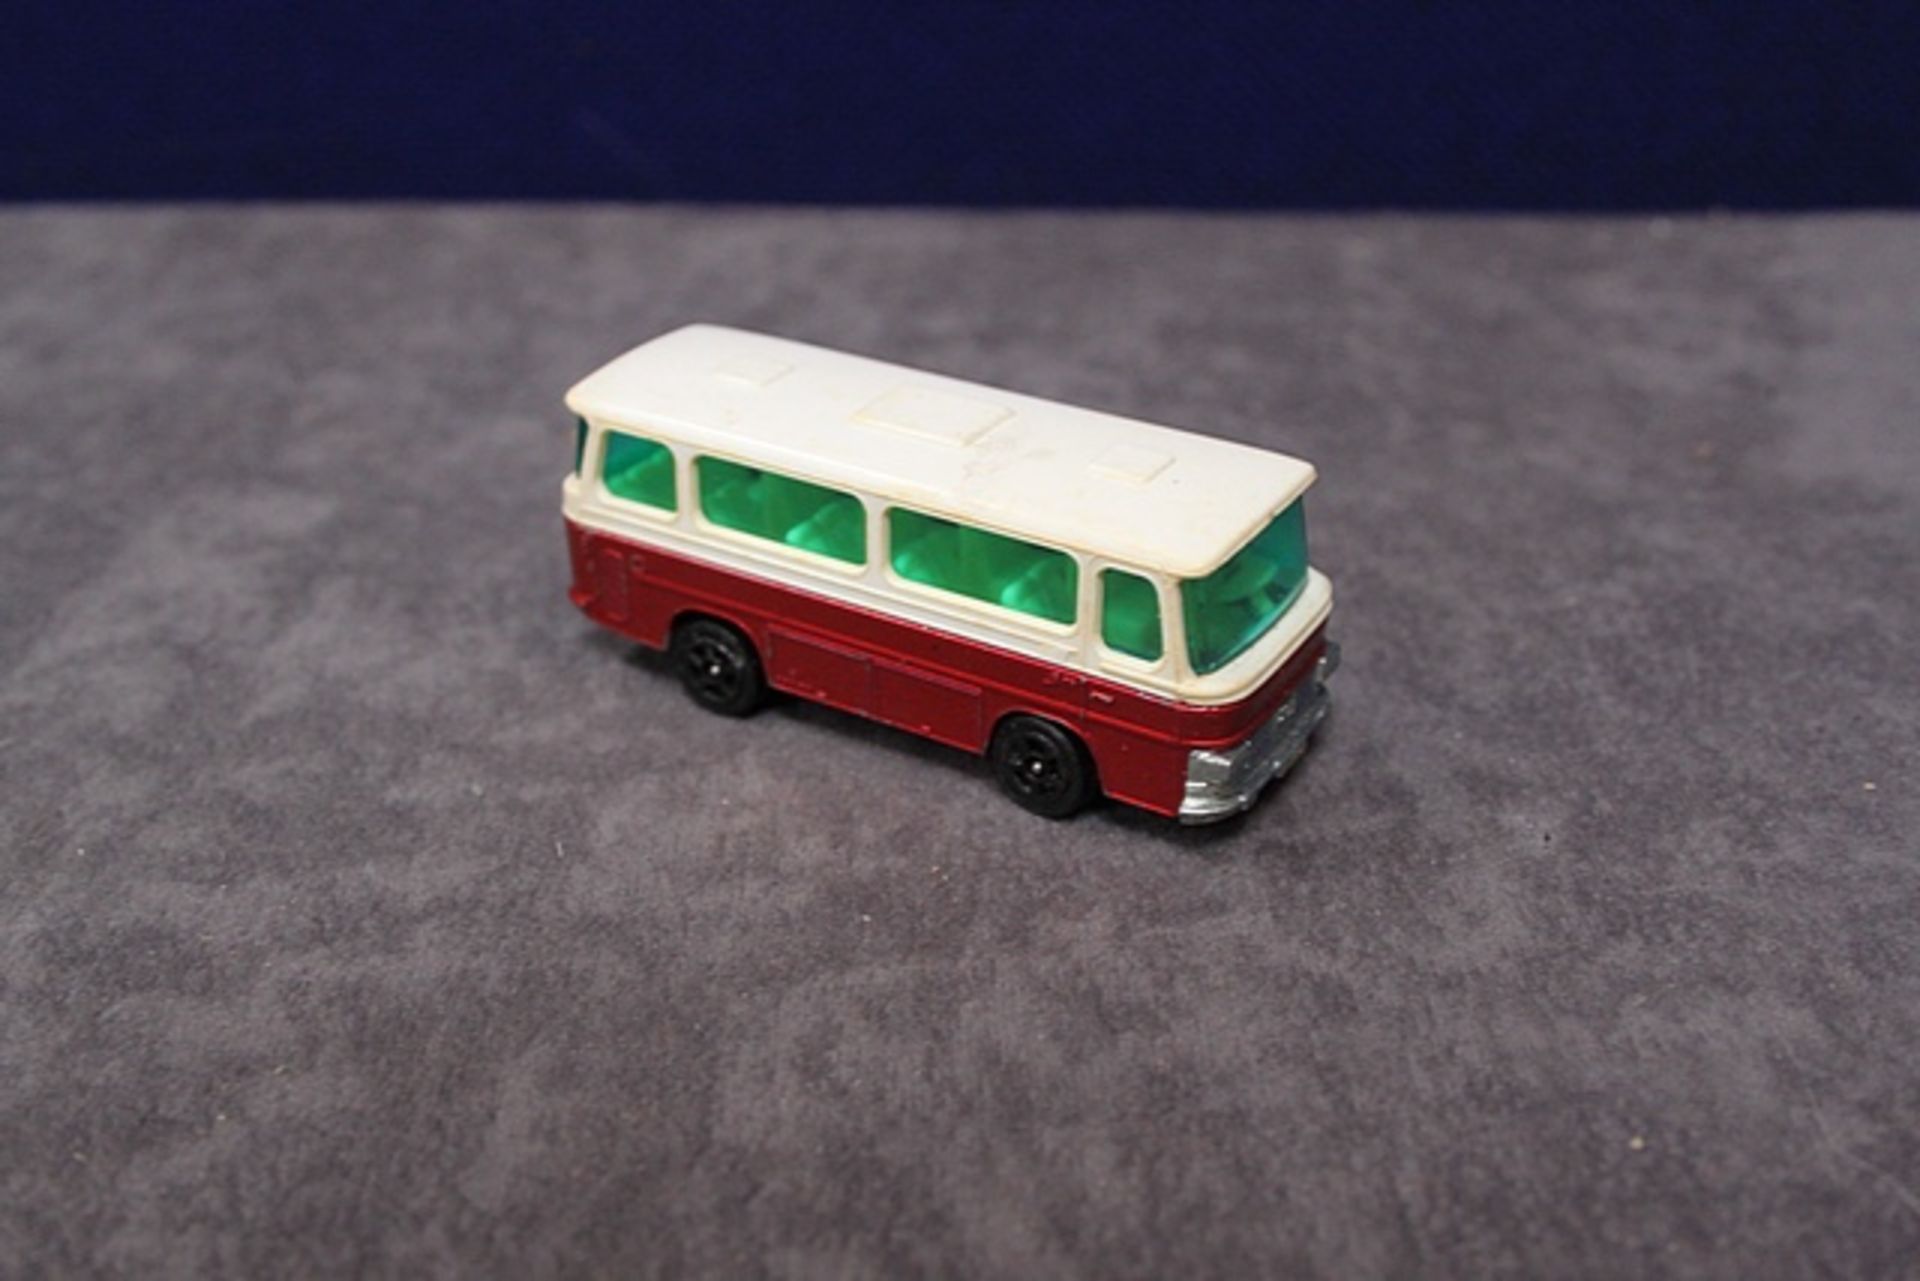 Matchbox Superfast Diecast # 12 Metallic Purple Setra Coach In Firm Box With A Small Tear On Flap - Image 2 of 3